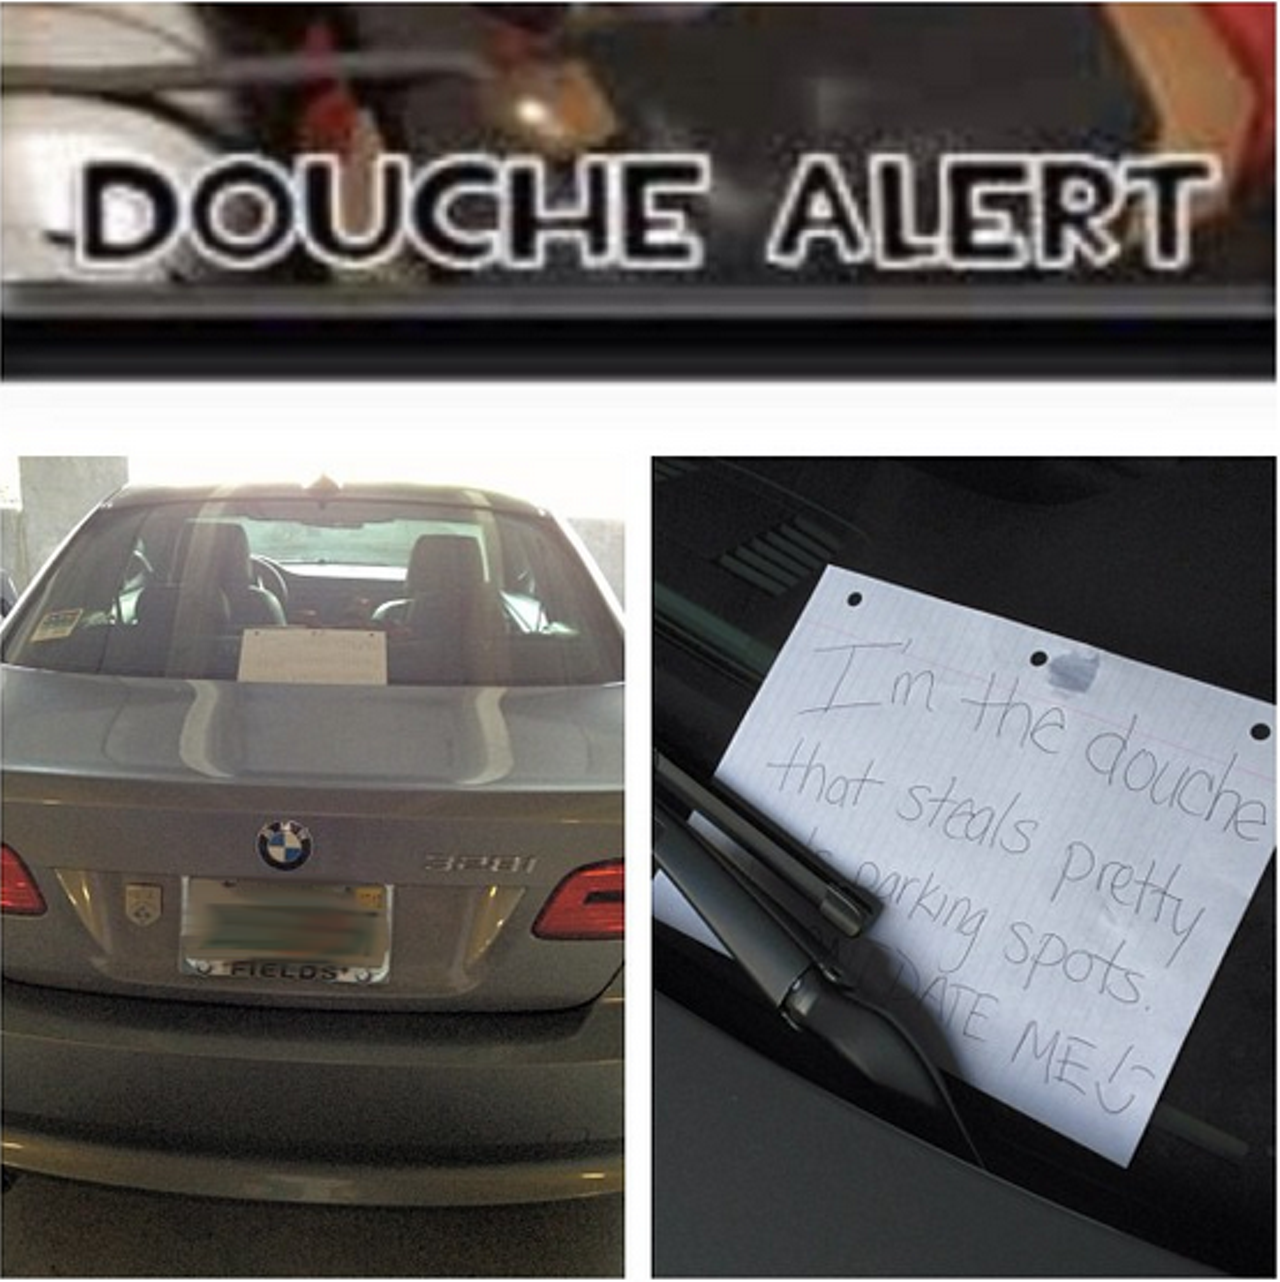 And, sometimes the notes are just plain bizarre.
"Lets have a toast to the douchebag that stole my spot, made me late to class & made me miss my quiz. It says, 'I'm the douche that steals pretty girls parking spots. Don't date me ;)"
Photo via itsstacymarie